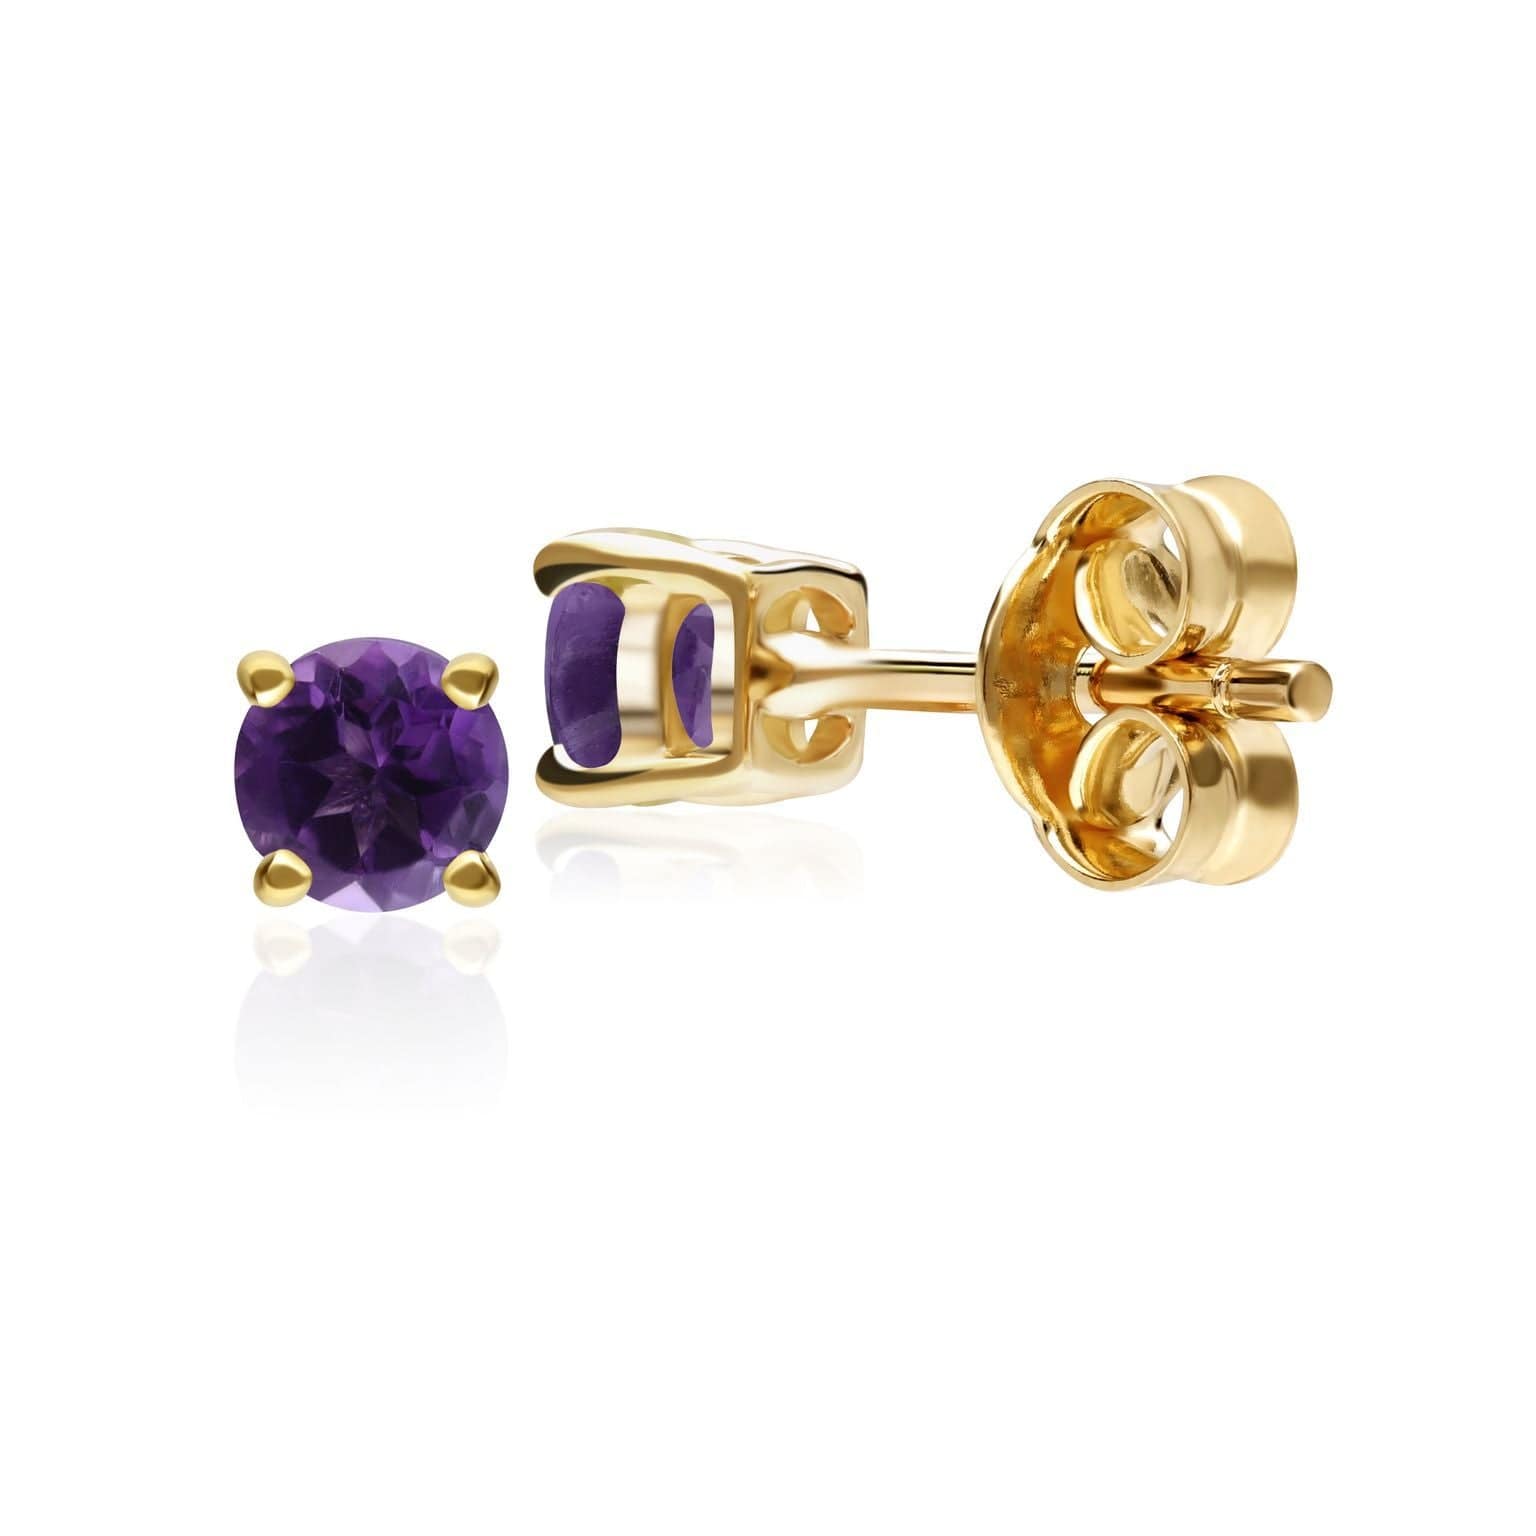 11560 Classic Round Amethyst Stud Earrings in 9ct Yellow Gold 2